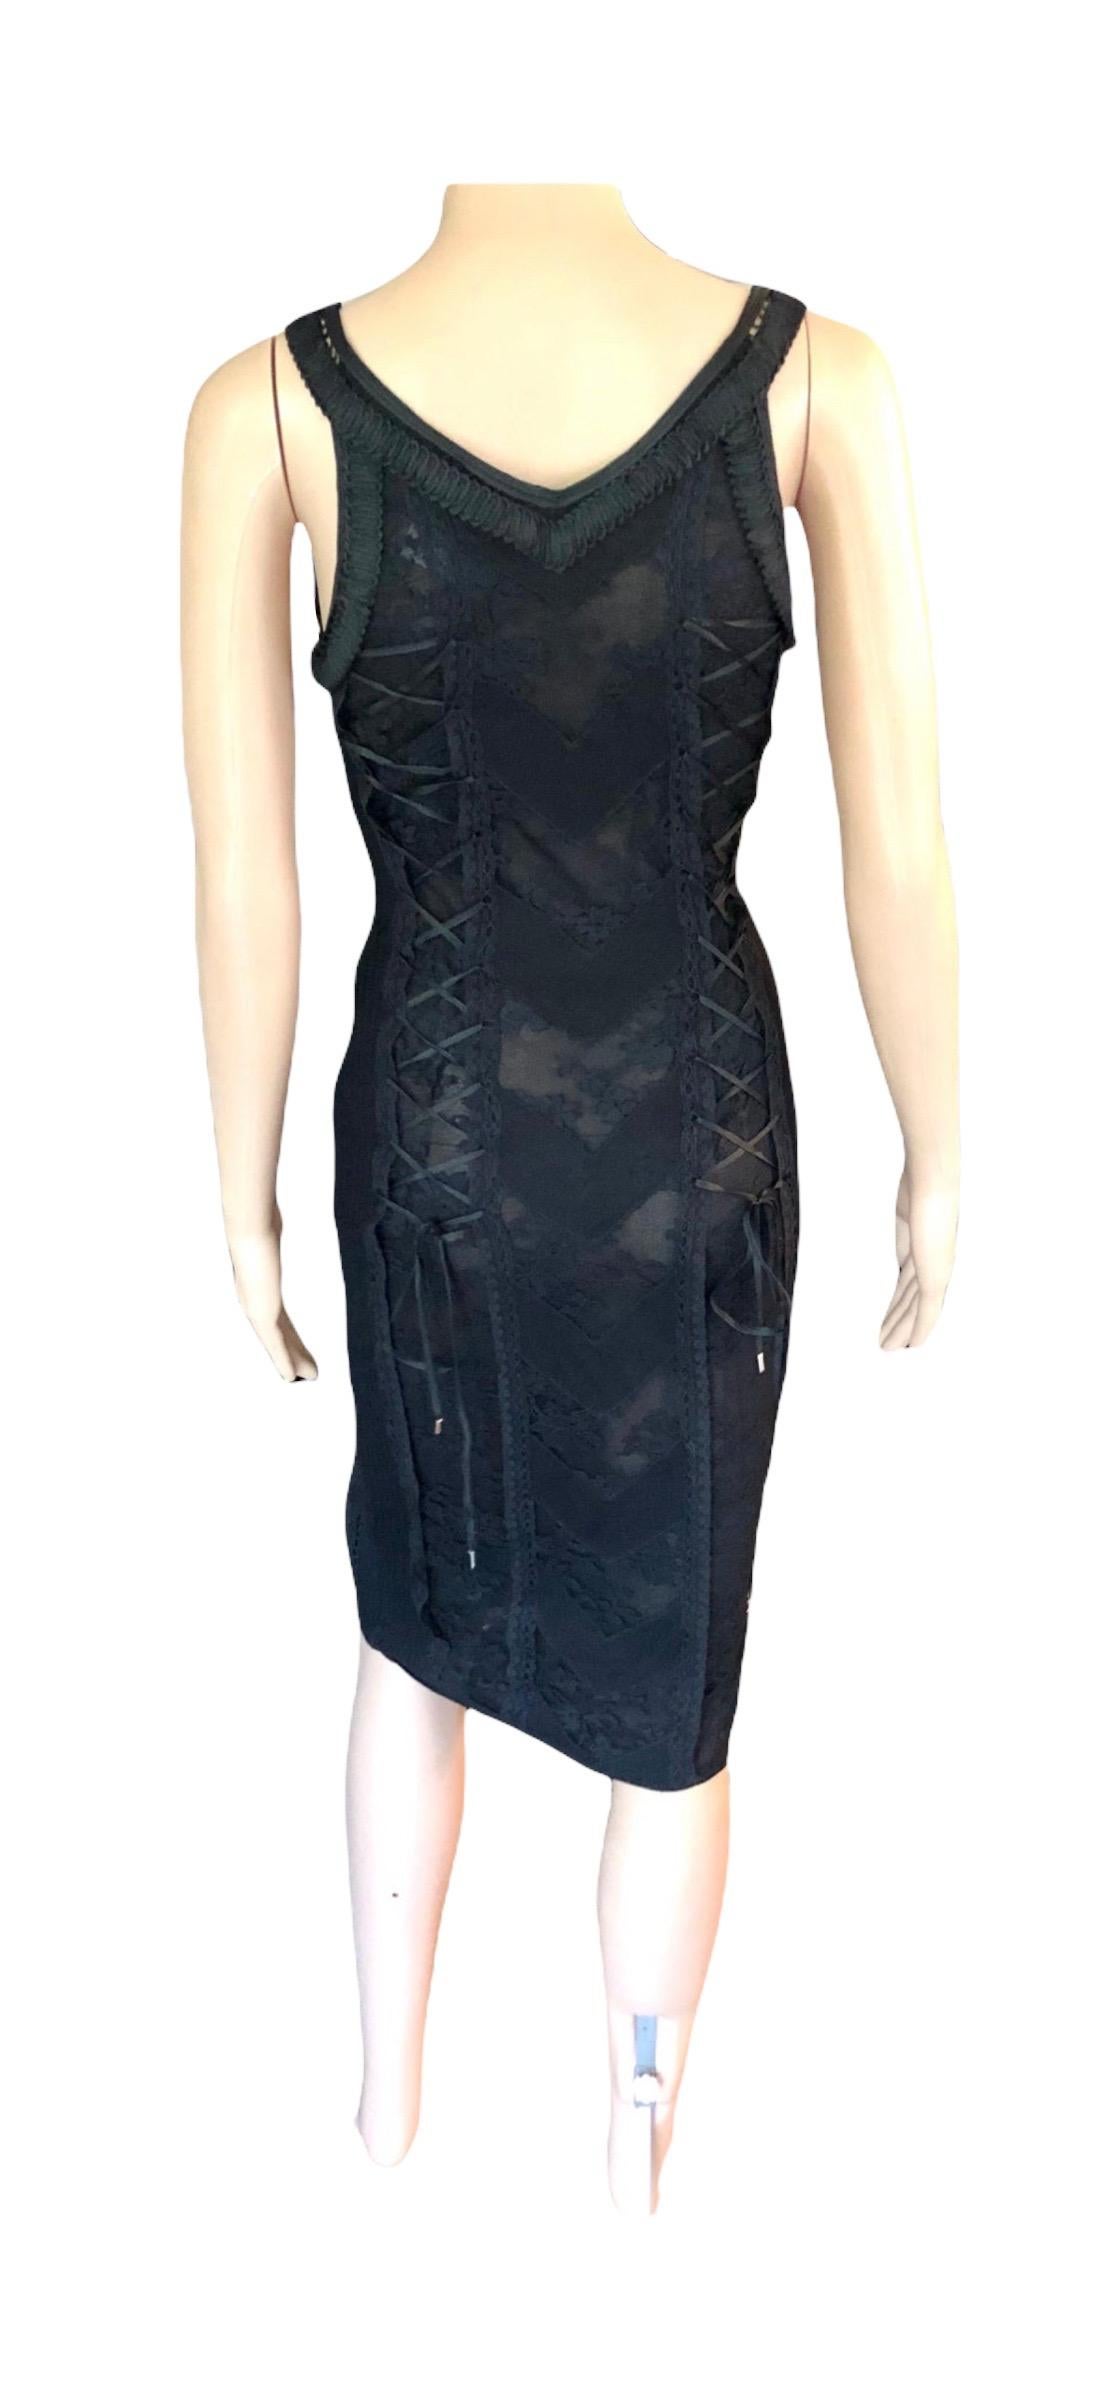 Christian Dior by John Galliano S/S 2006 Sheer Lace Trimmed Corset Knit Dress For Sale 4